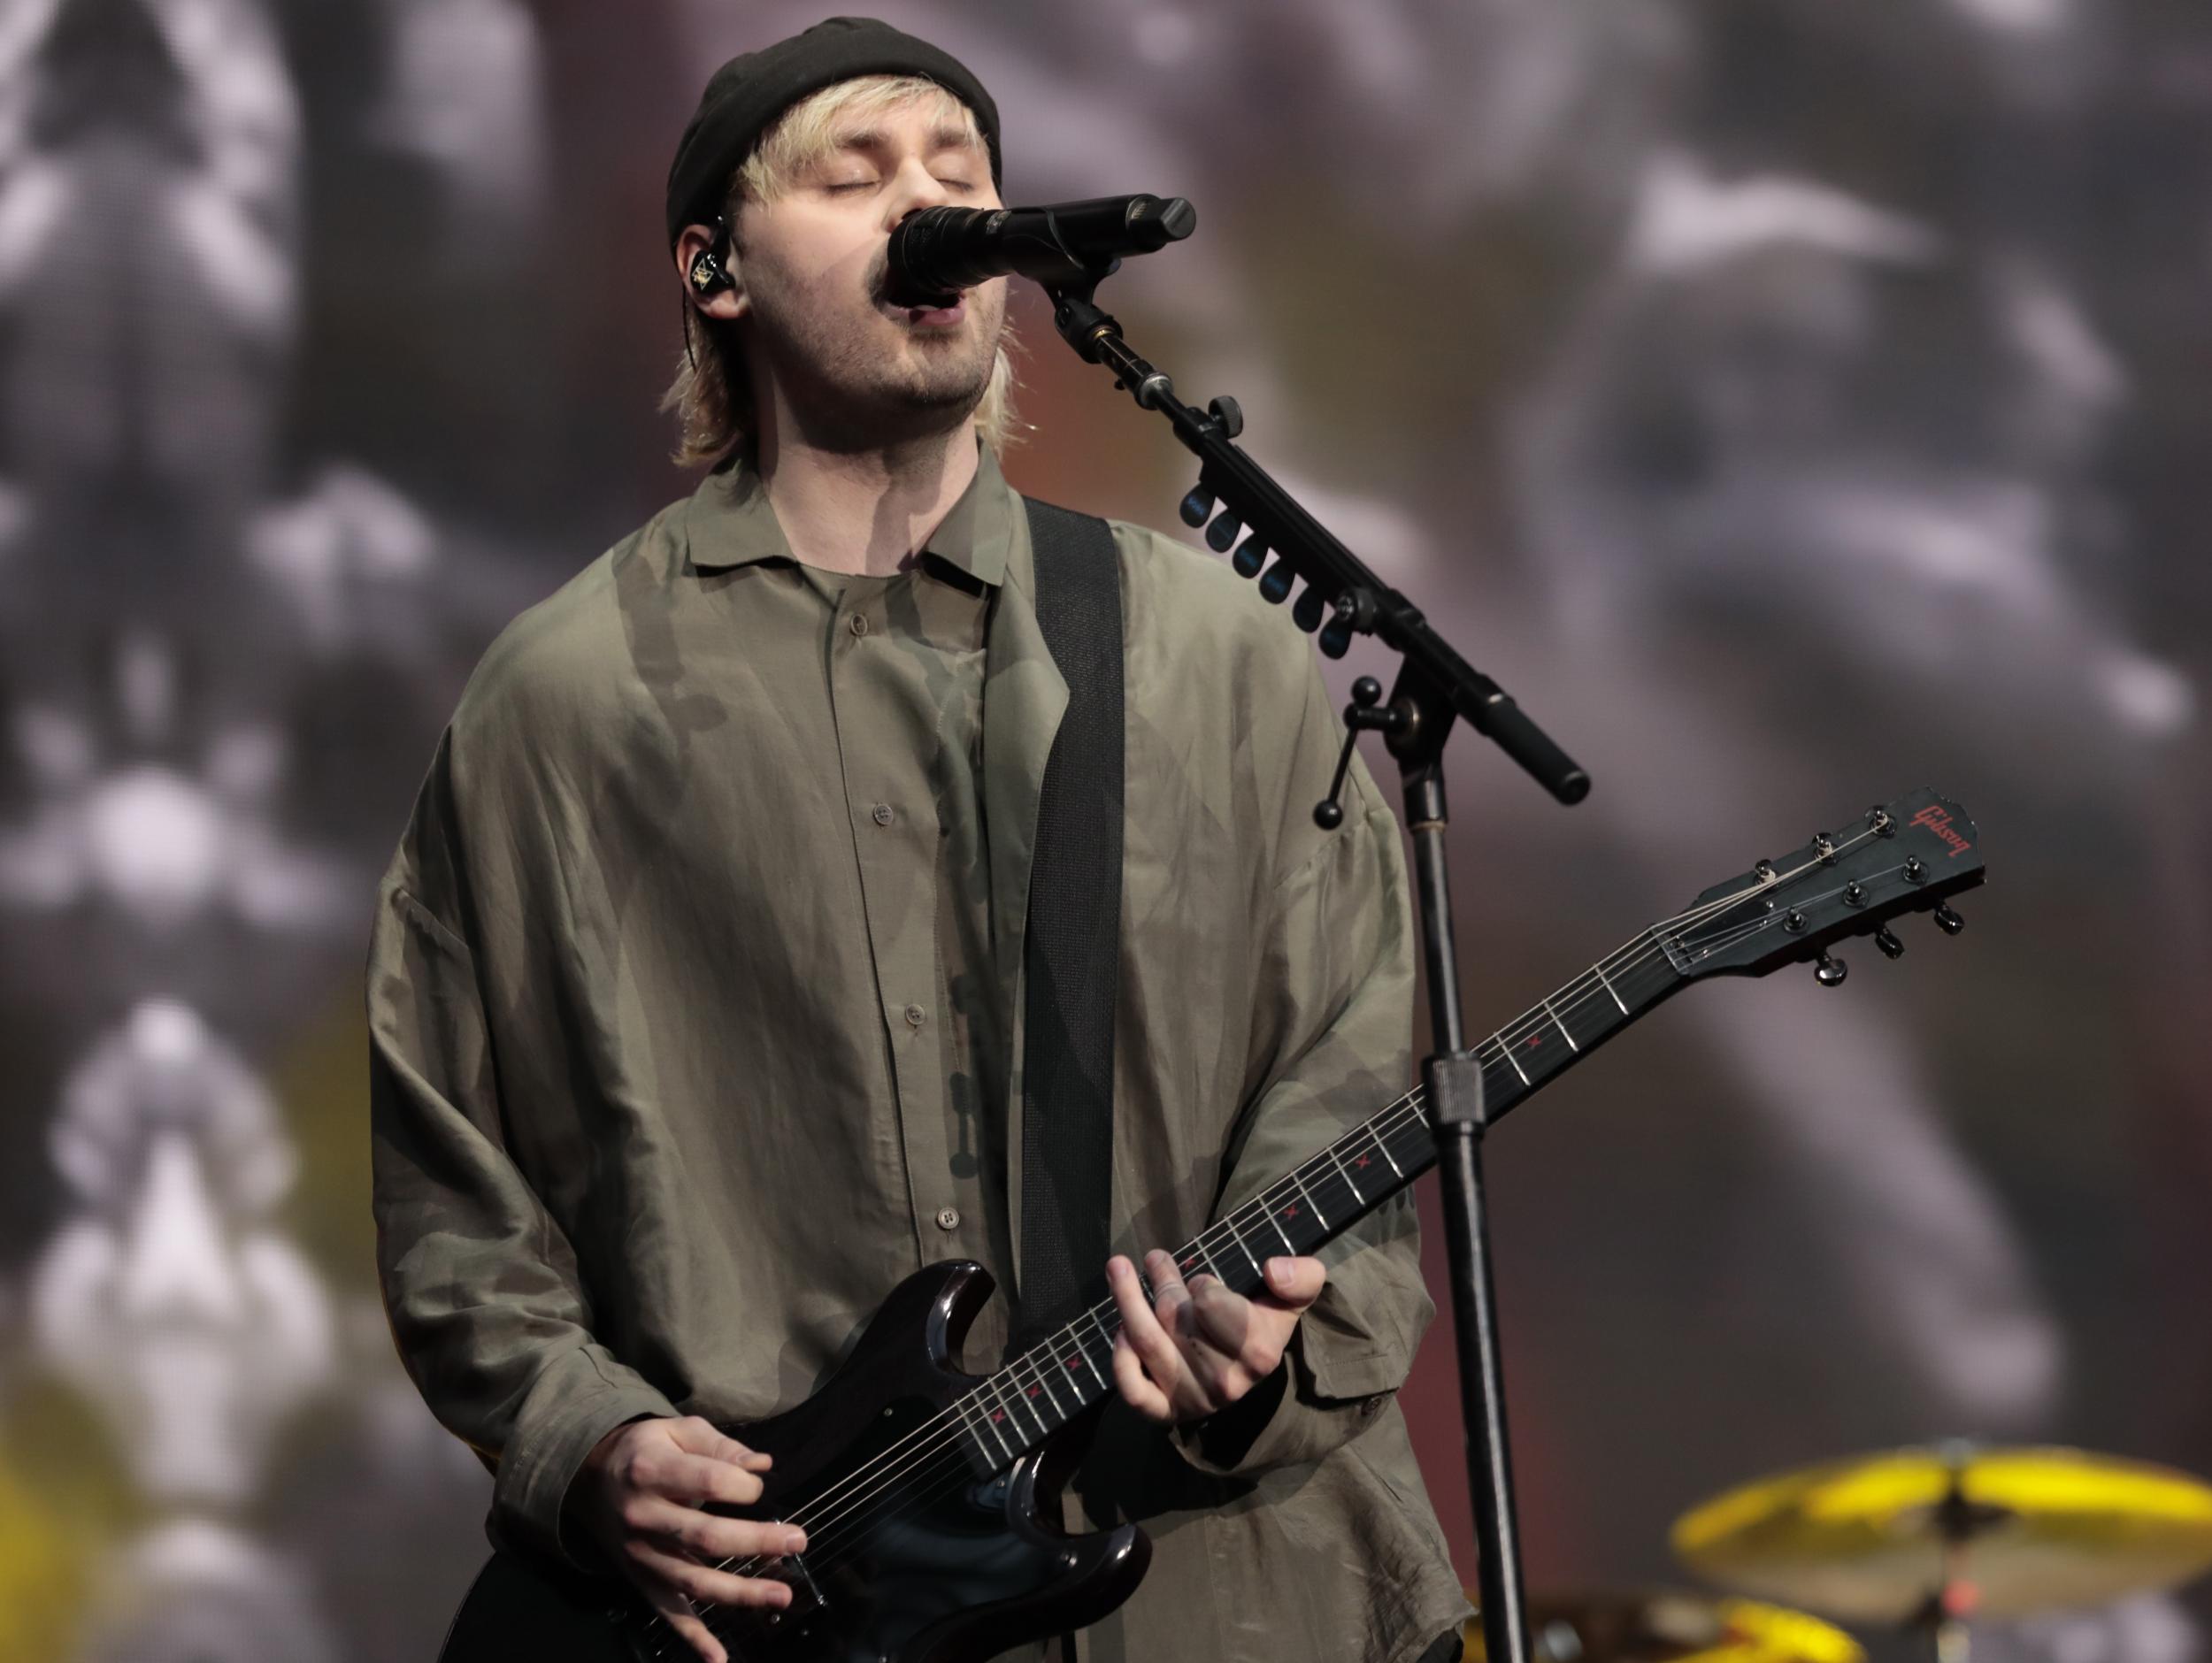 5 Seconds of Summer guitarist Michael Clifford apologises for past